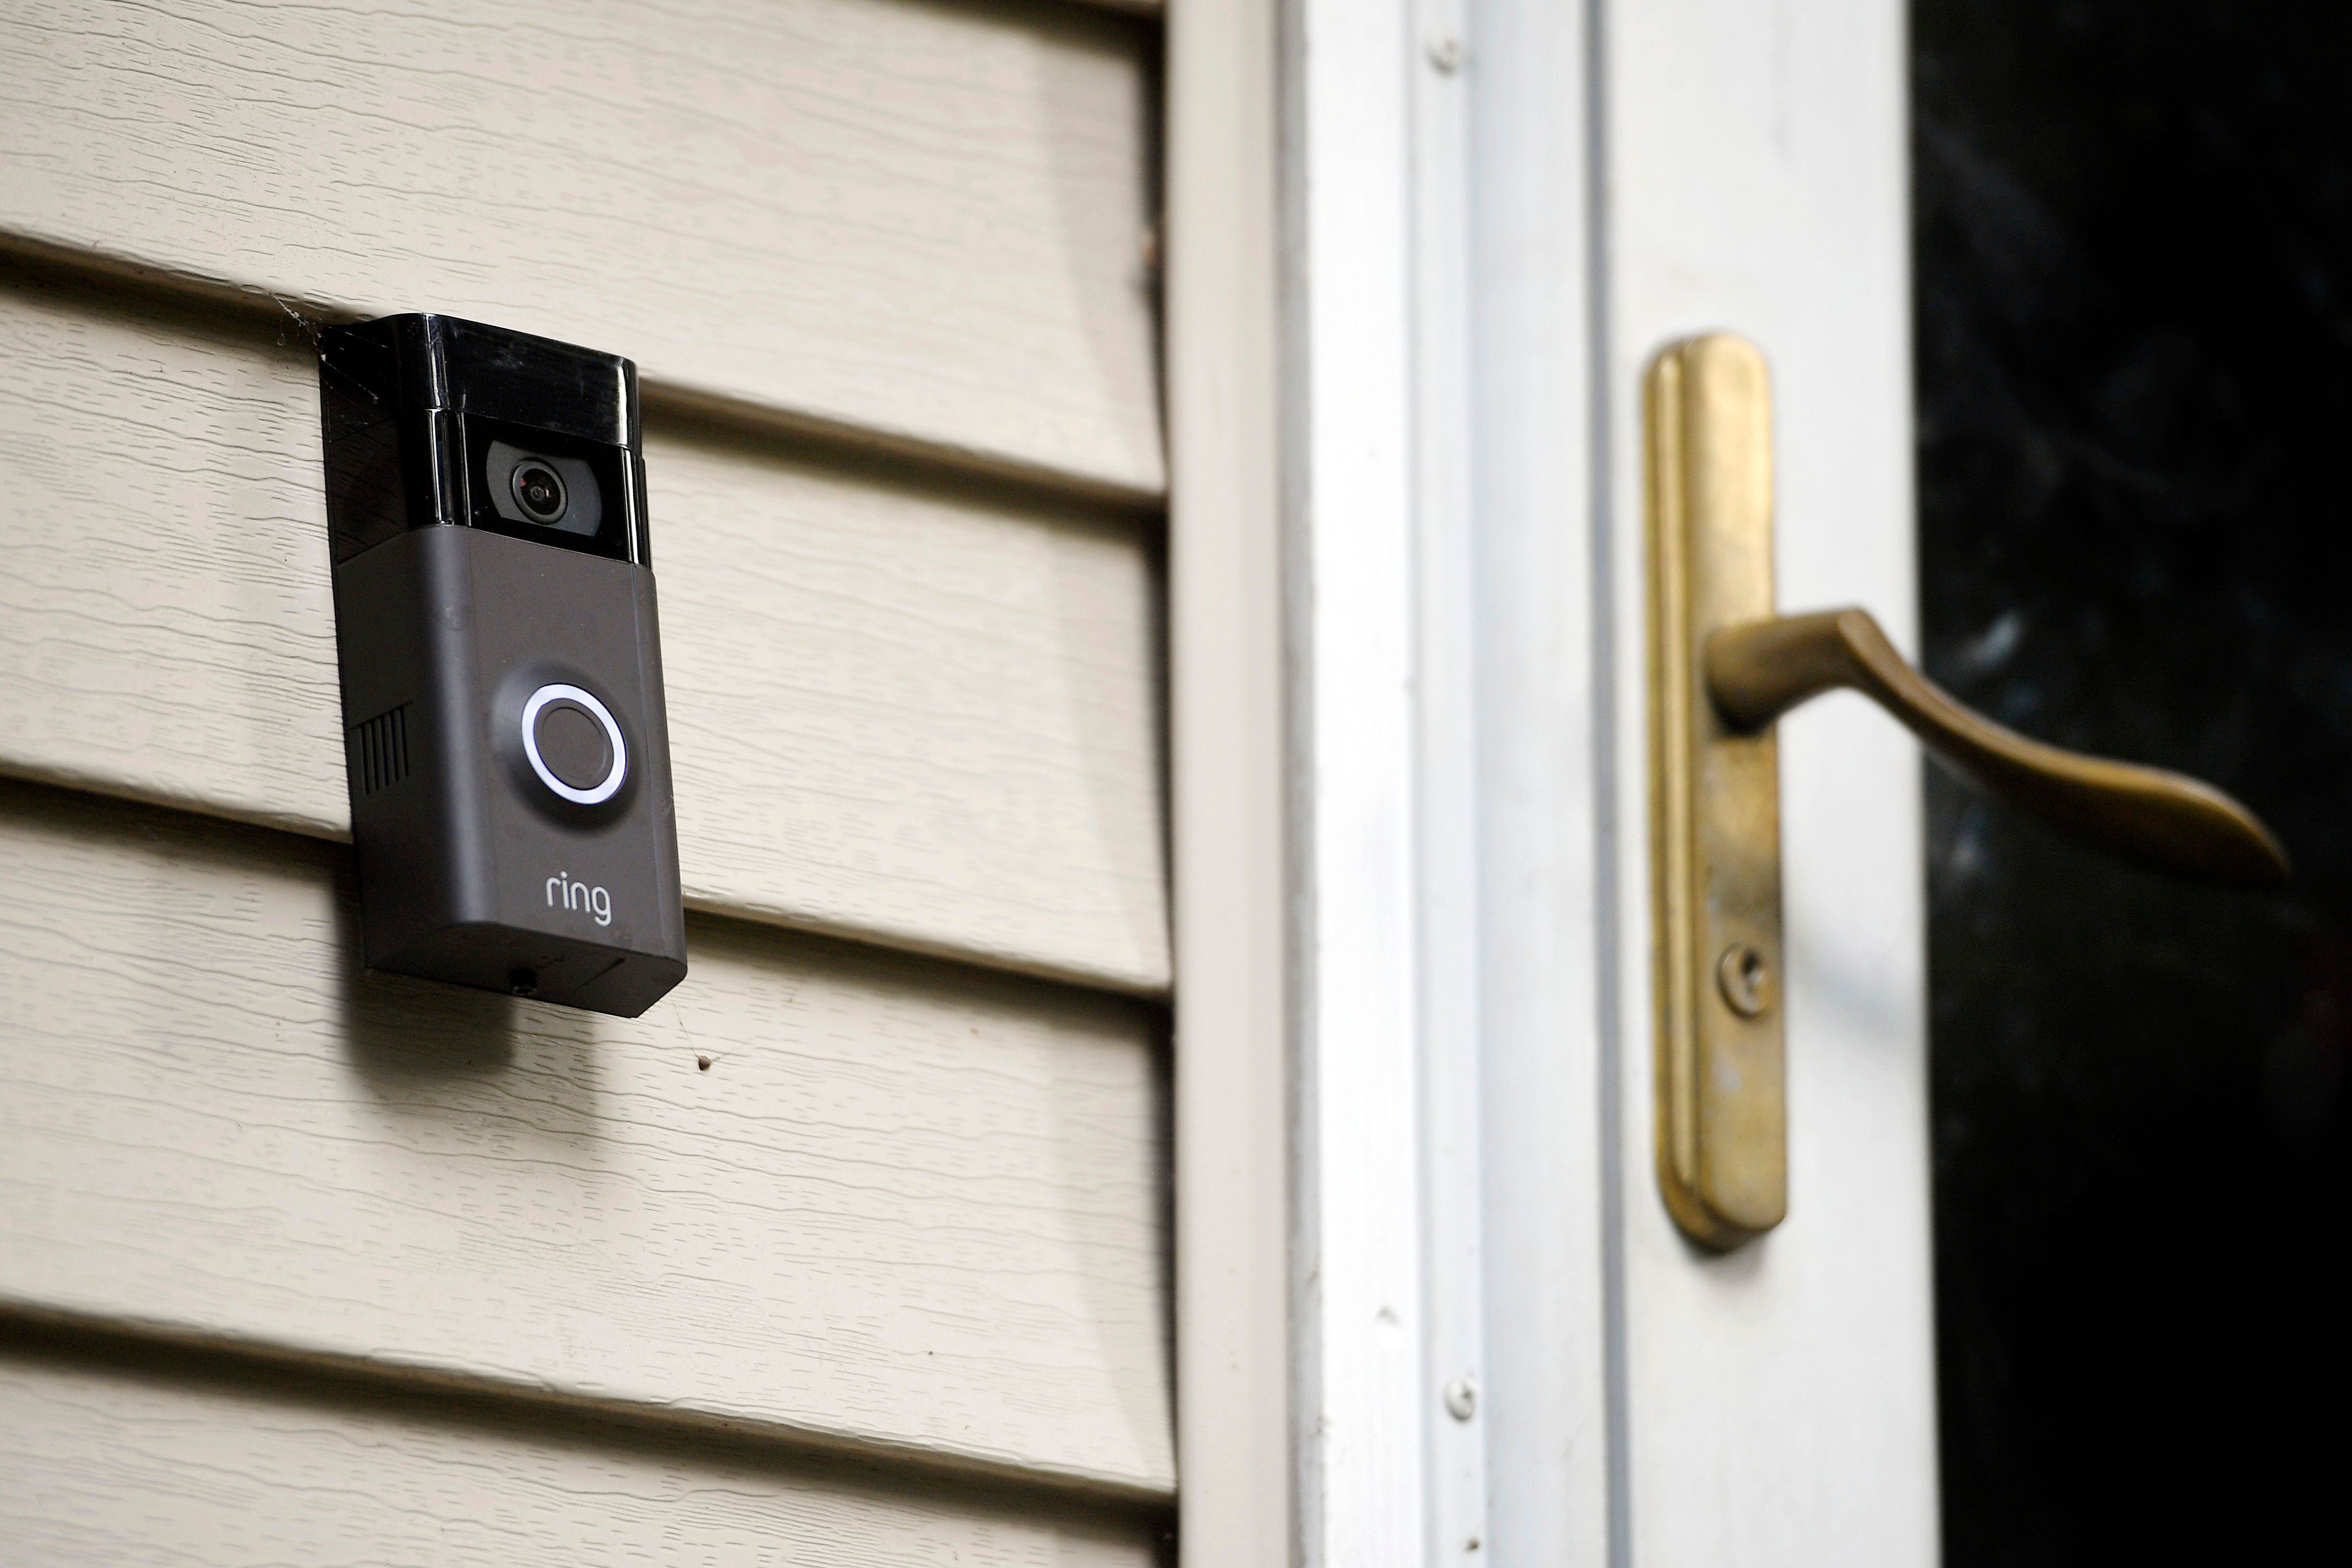 Amazon's Ring will stop letting police request doorbell video footage